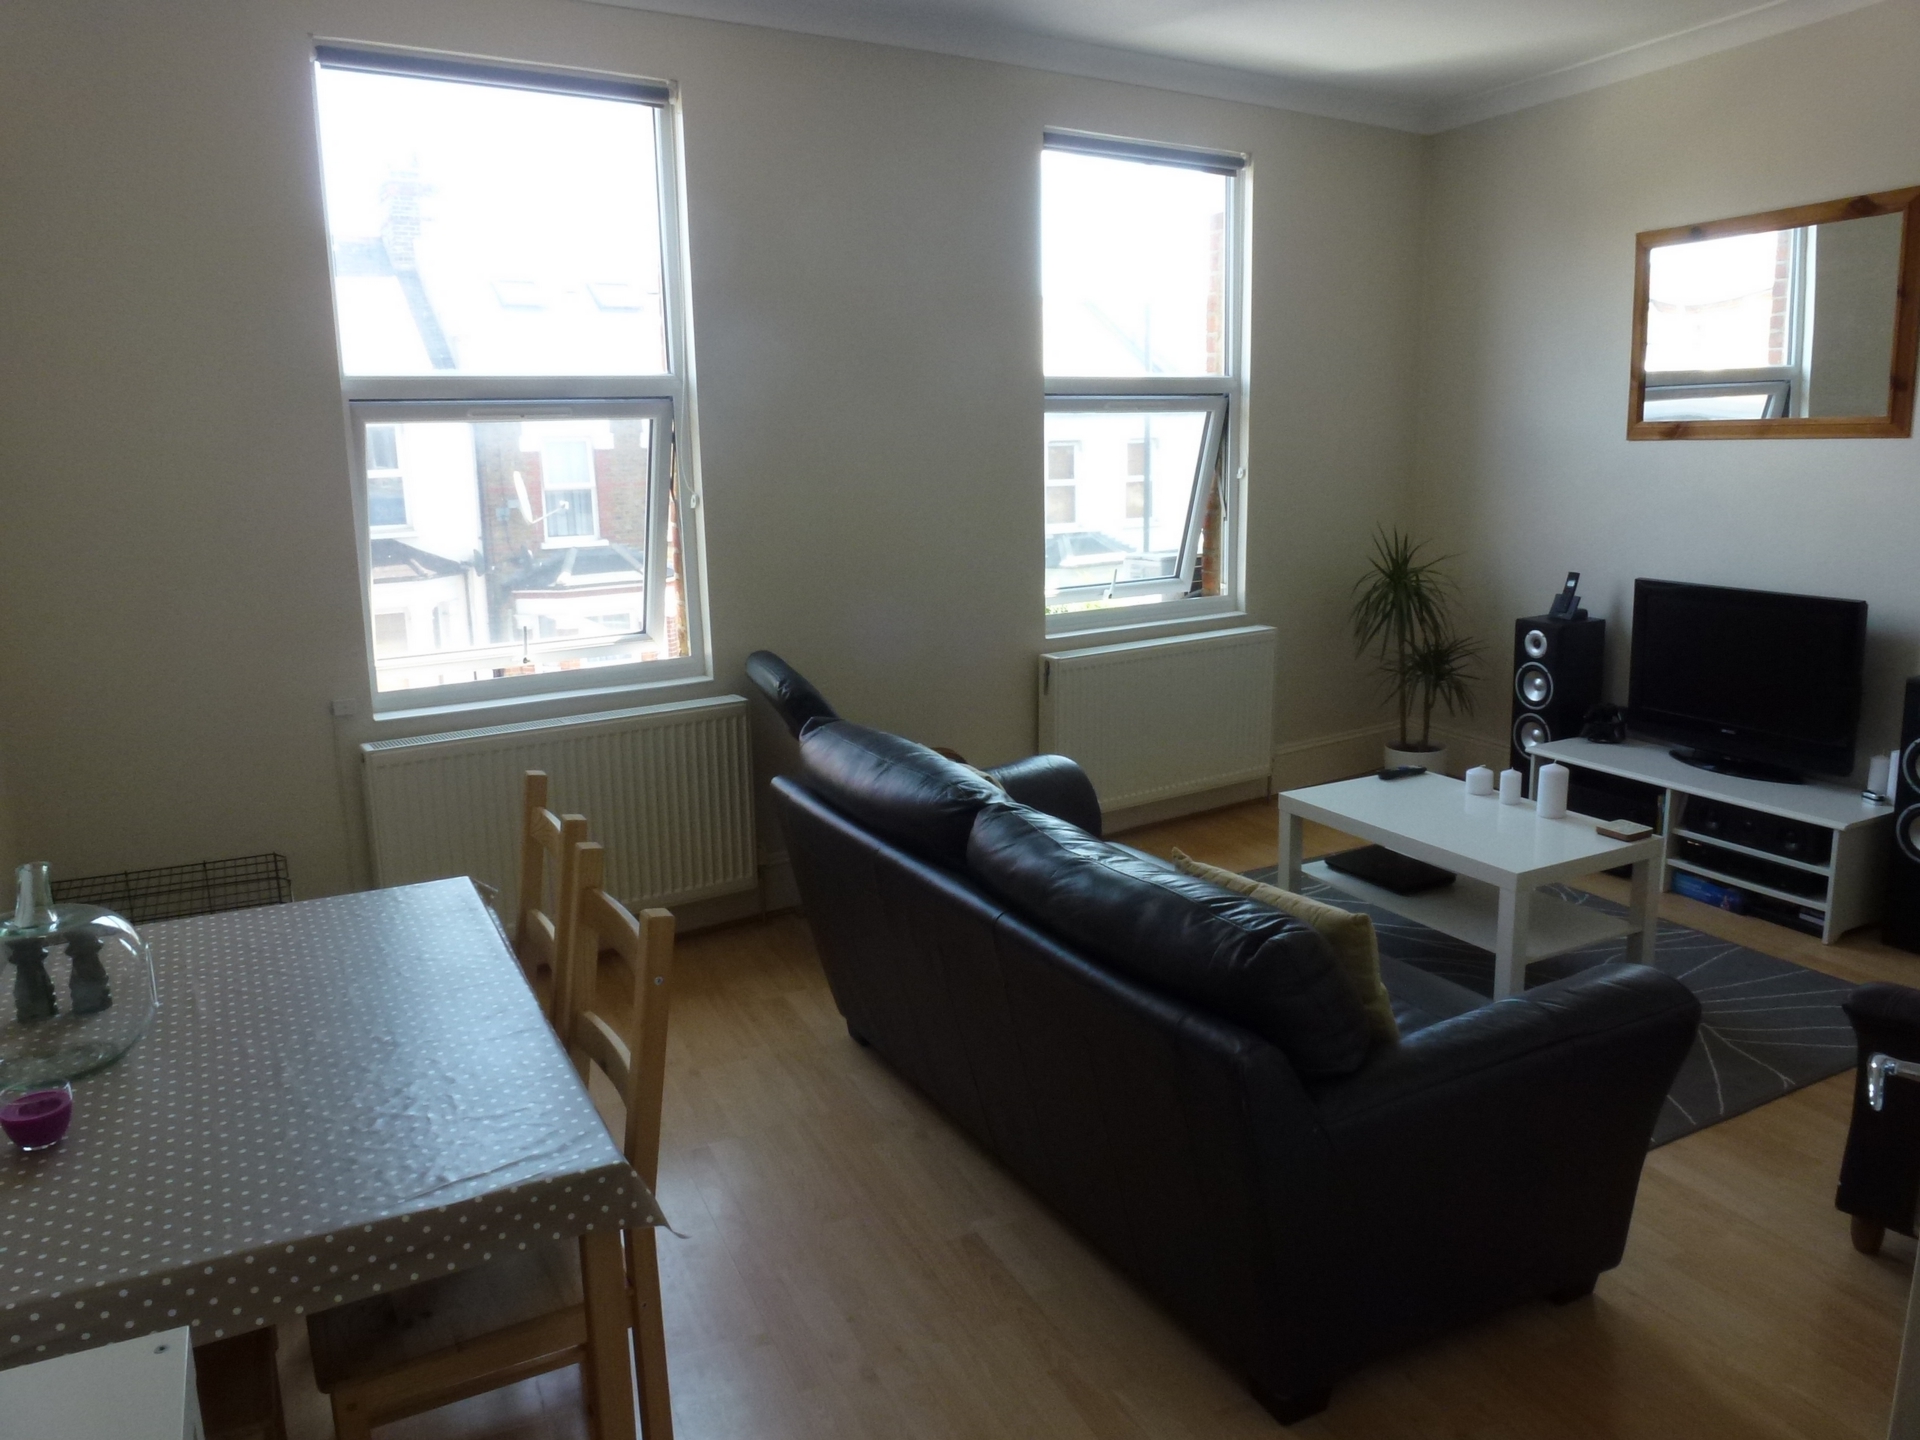 1 Bedroom Apartment to rent in Wimbledon, London, SW19